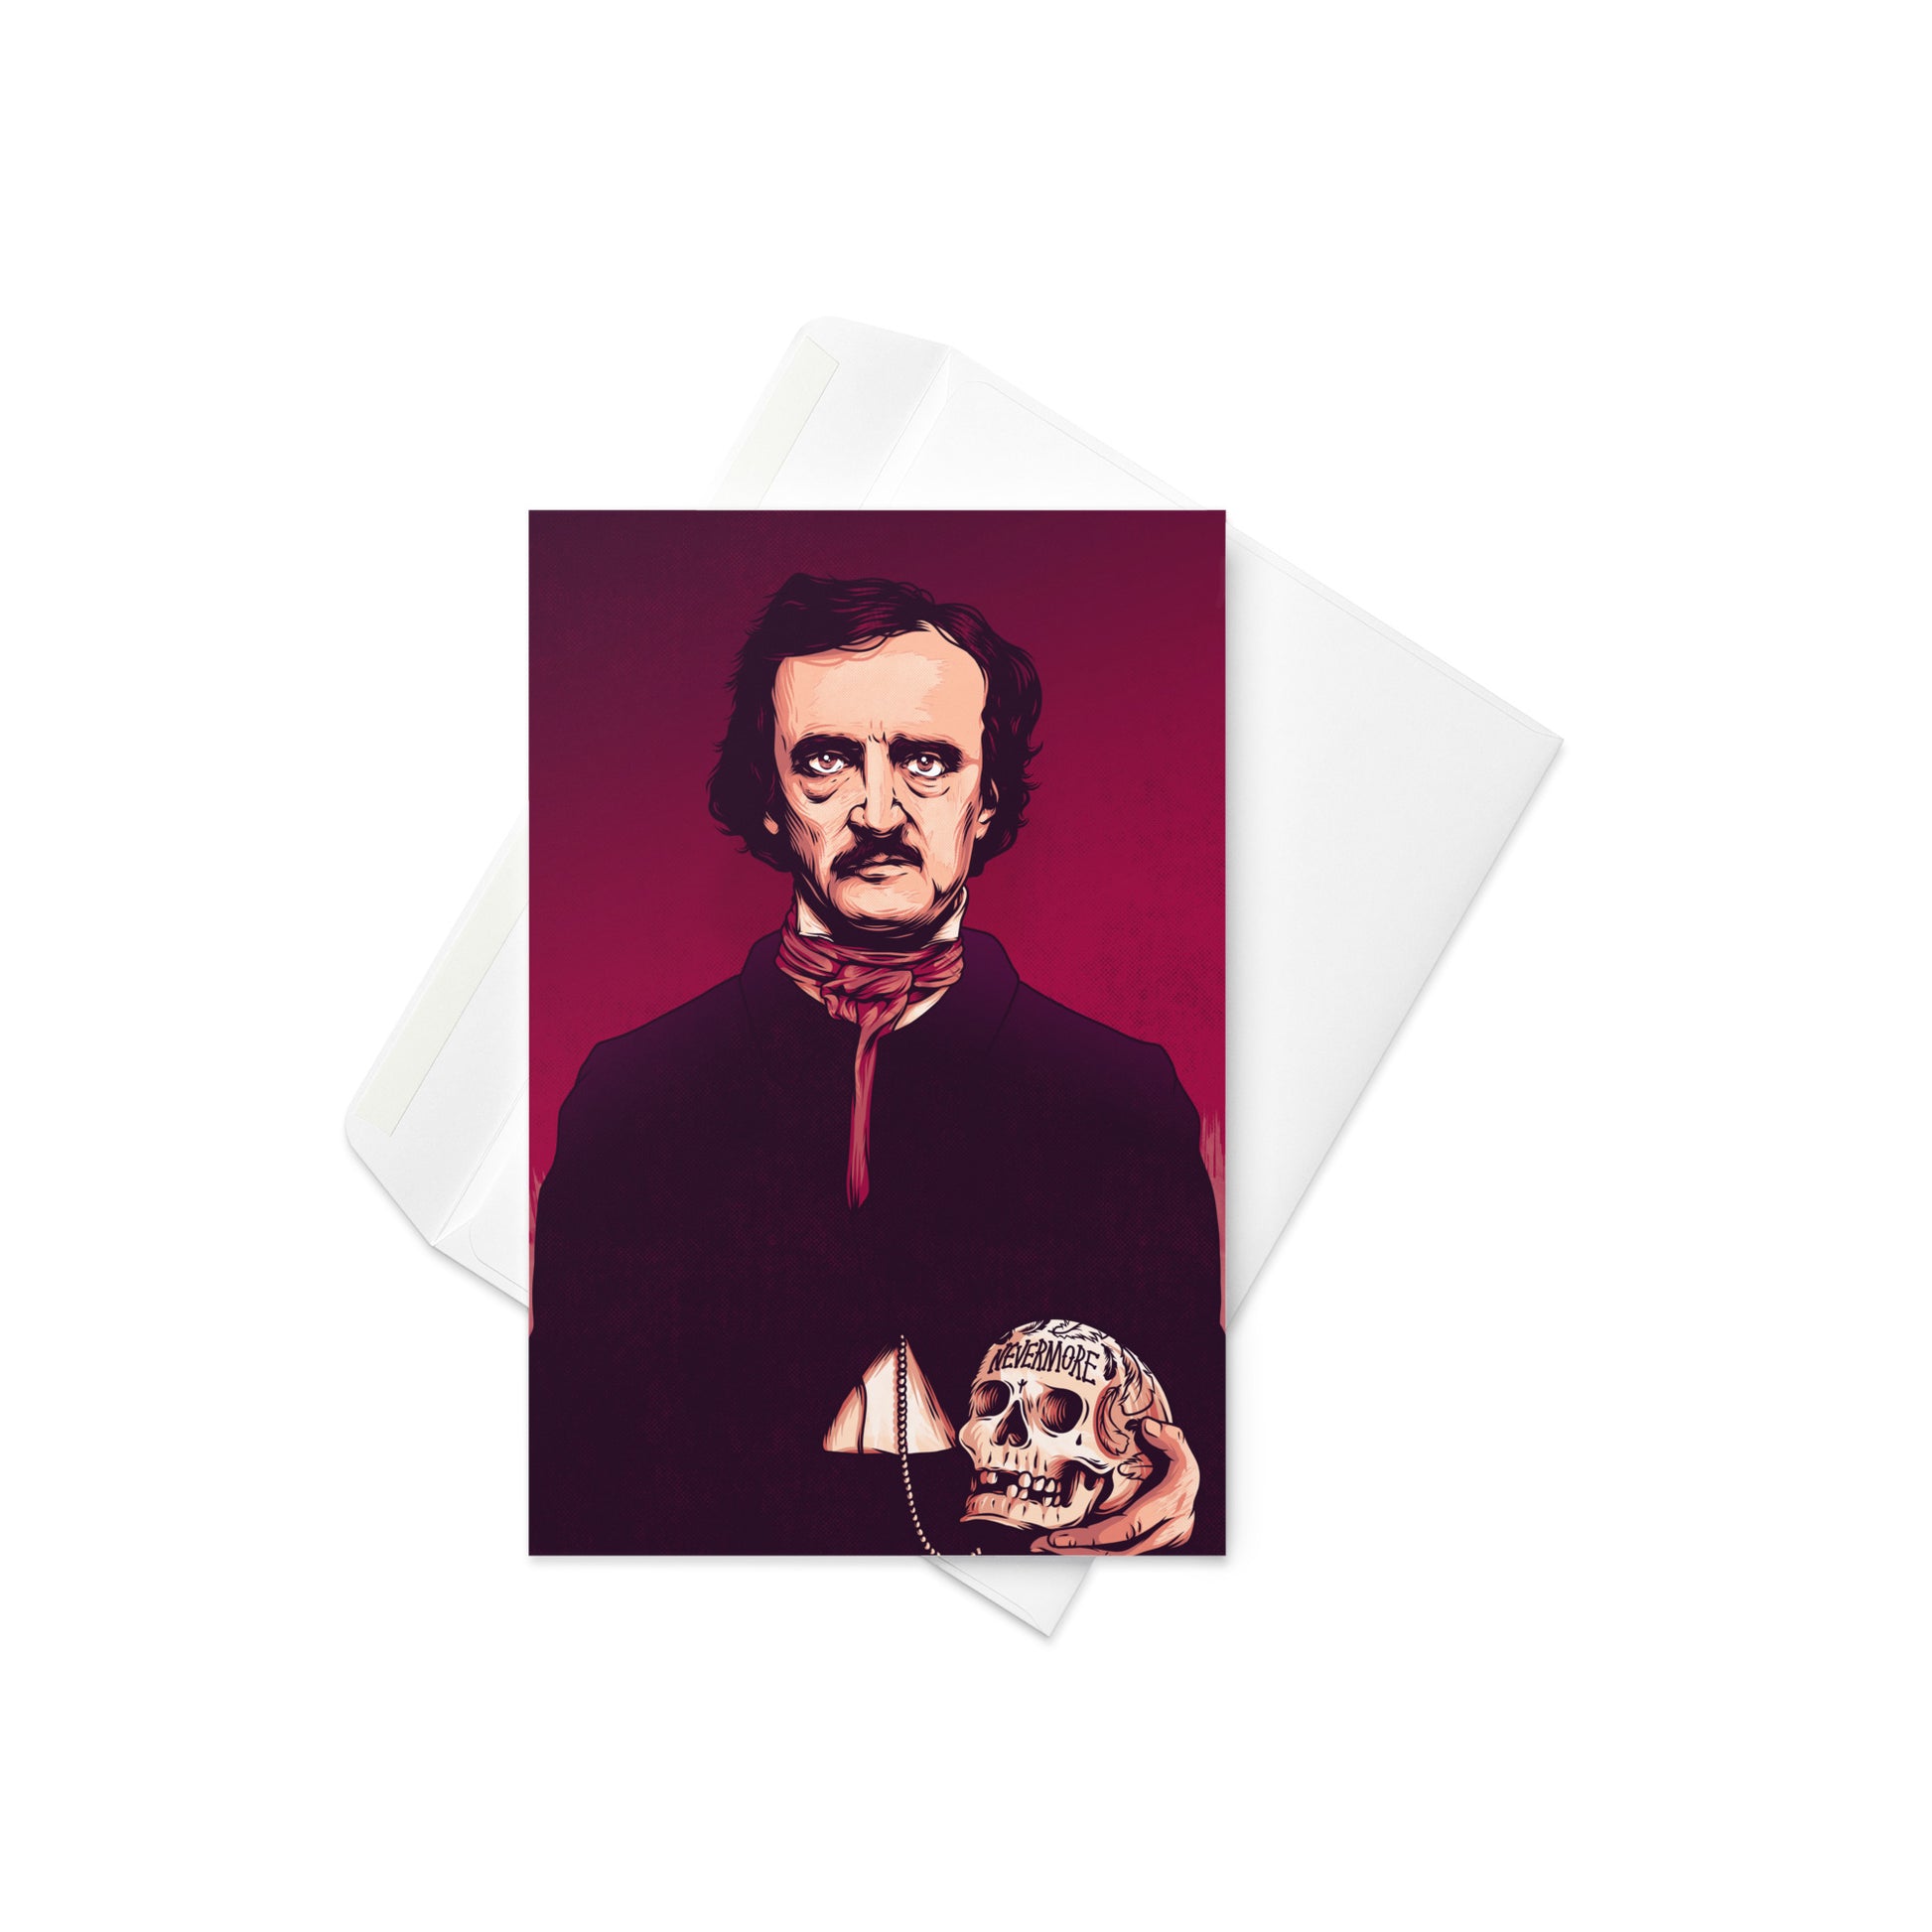 Edgar Allan Poe Illustrated Greeting Card with Raven and Skull Design - 4x6